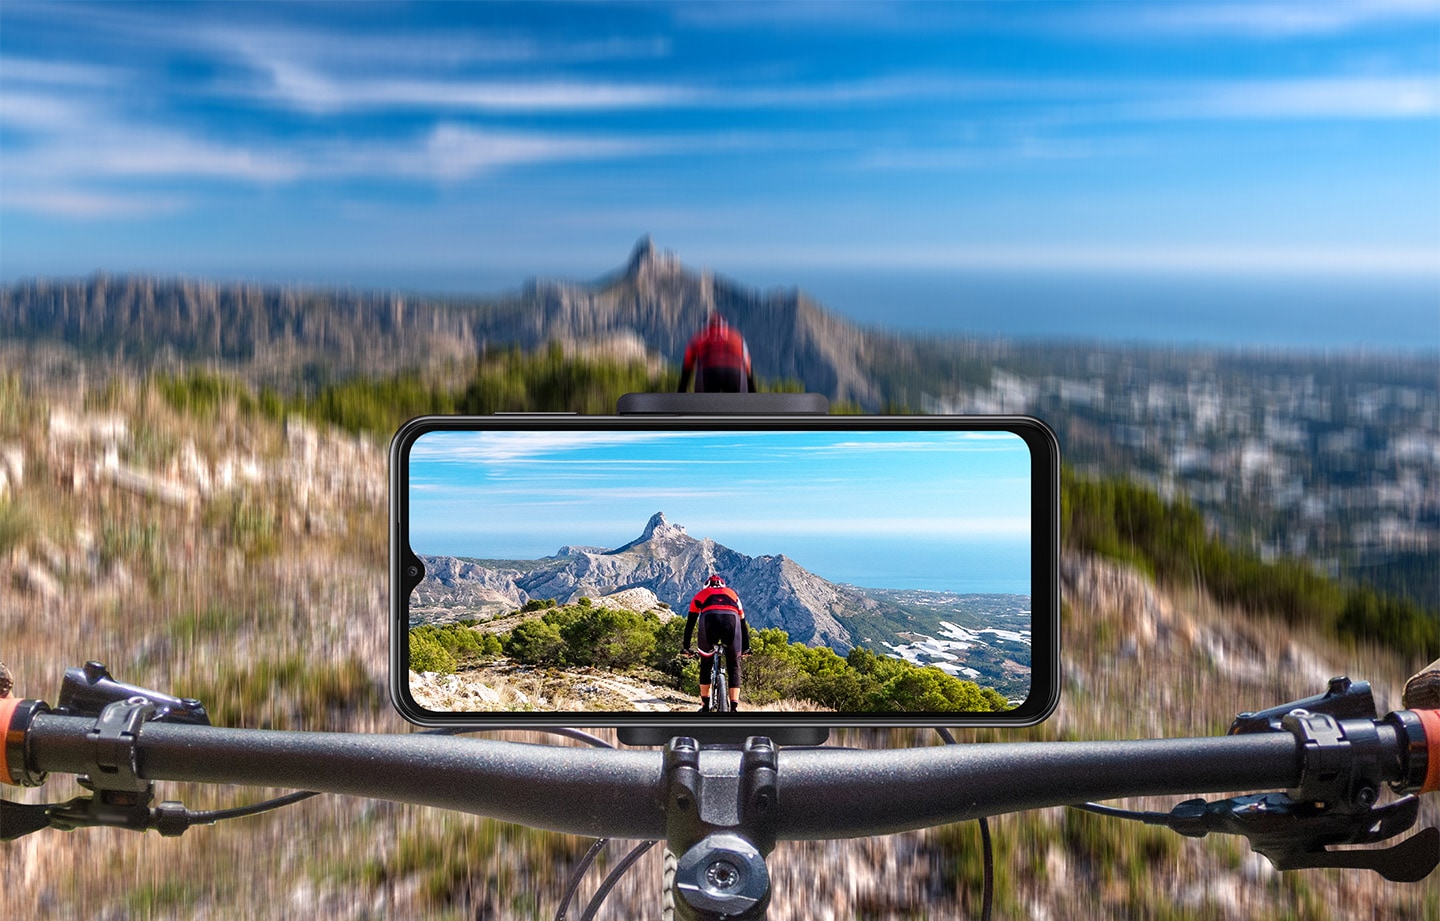 Read Samsung Galaxy A23 reviews and compare Samsung Galaxy A23 with the other models. See Samsung Galaxy A23 release date, specs, and features. A Galaxy A23 is mounted in landscape mode on a bicycle handlebar